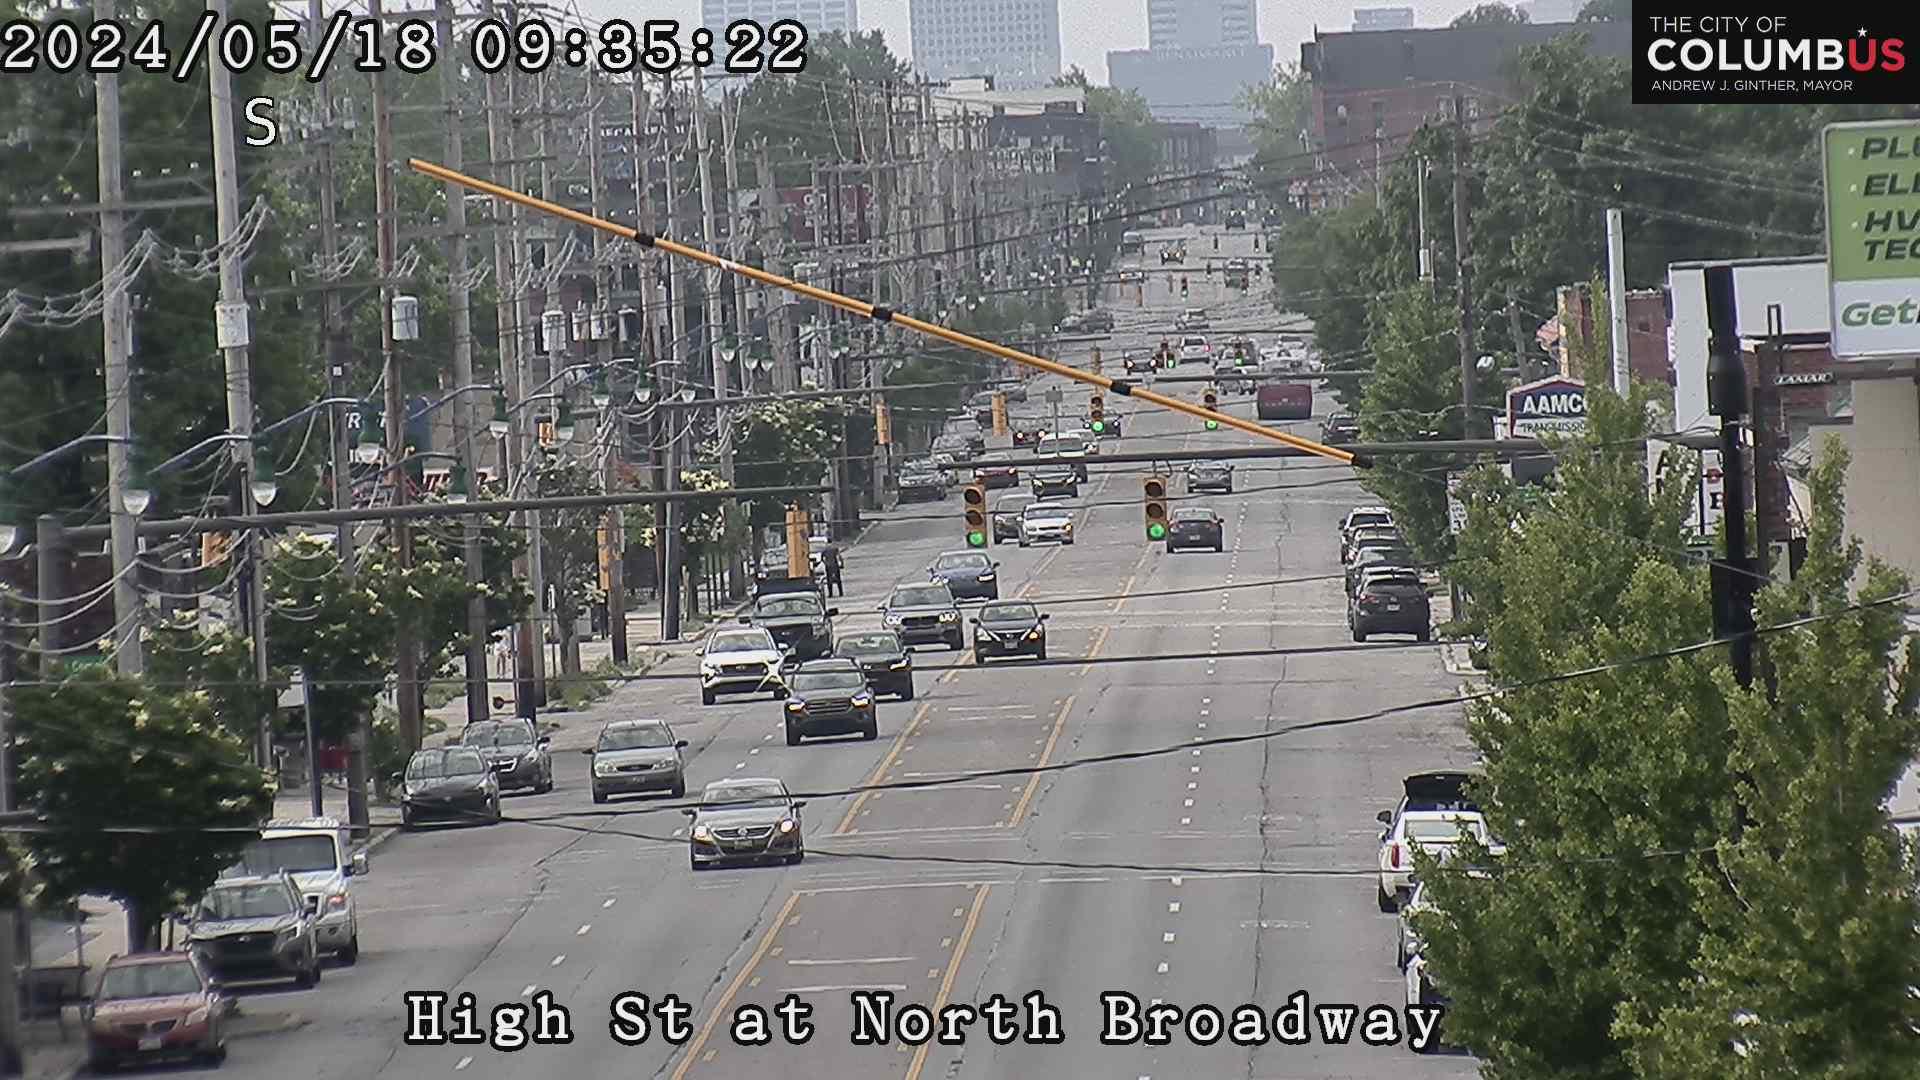 Traffic Cam Columbus: City of - High St at North Broadway St